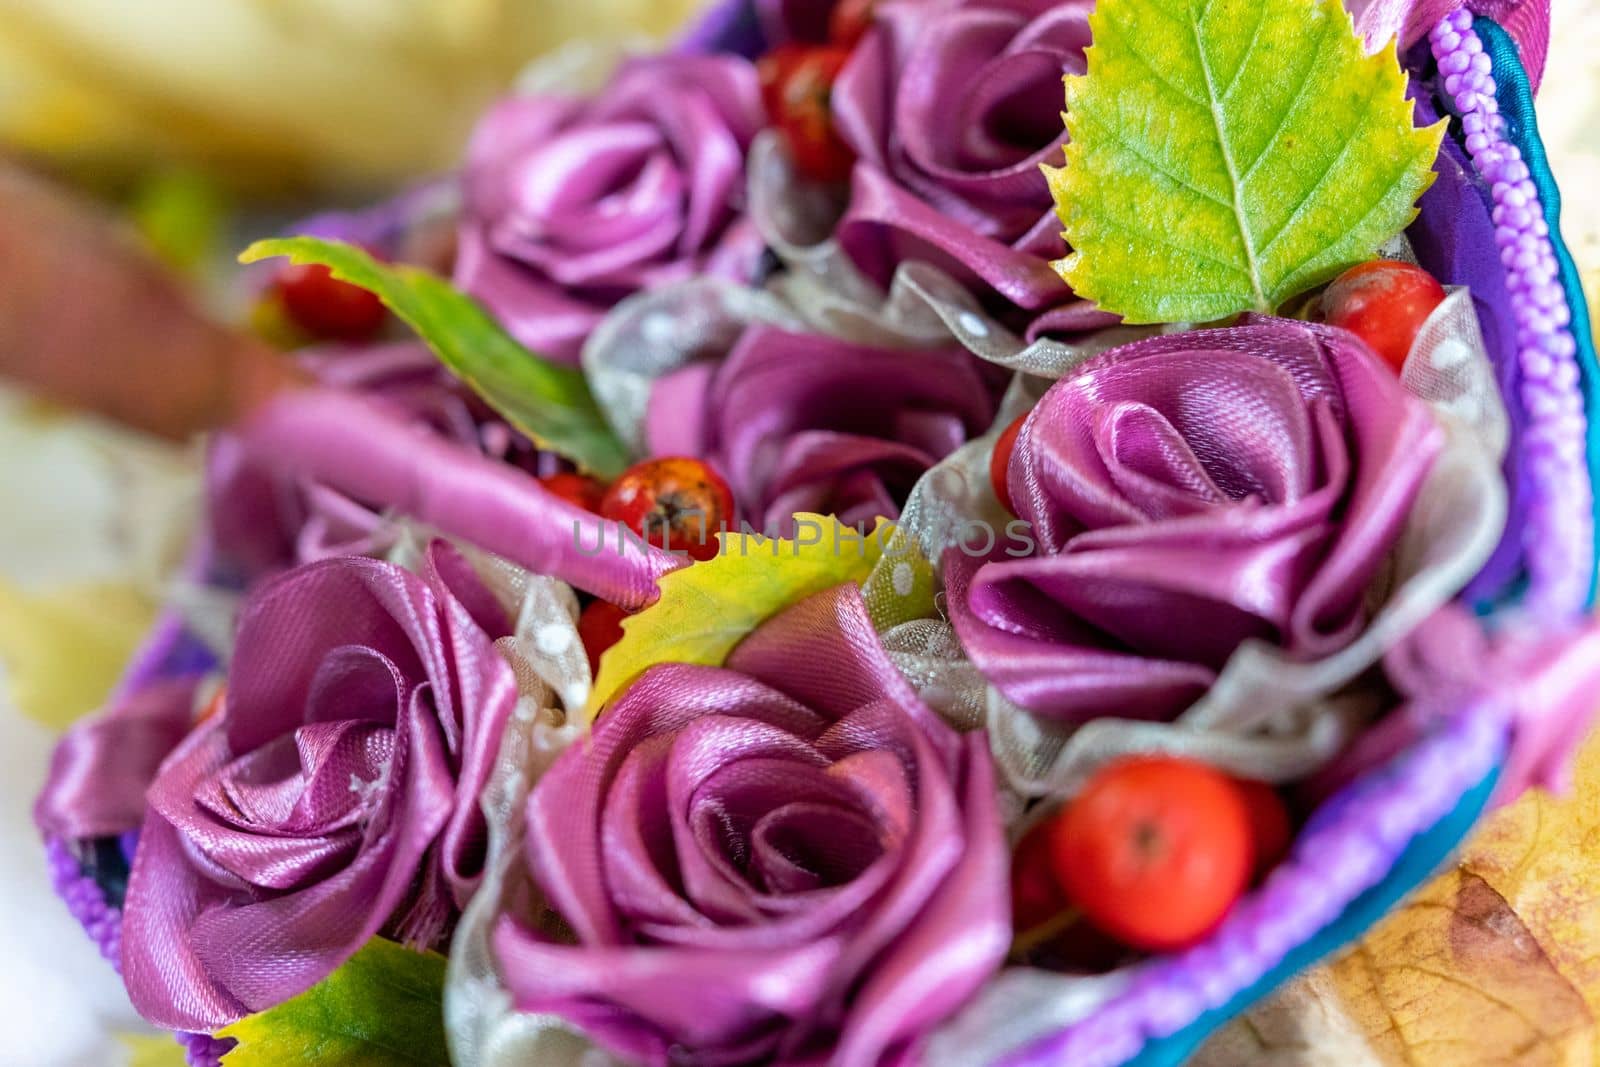 A beautiful bouquet of flowers made of purple fabric. by Serhii_Voroshchuk